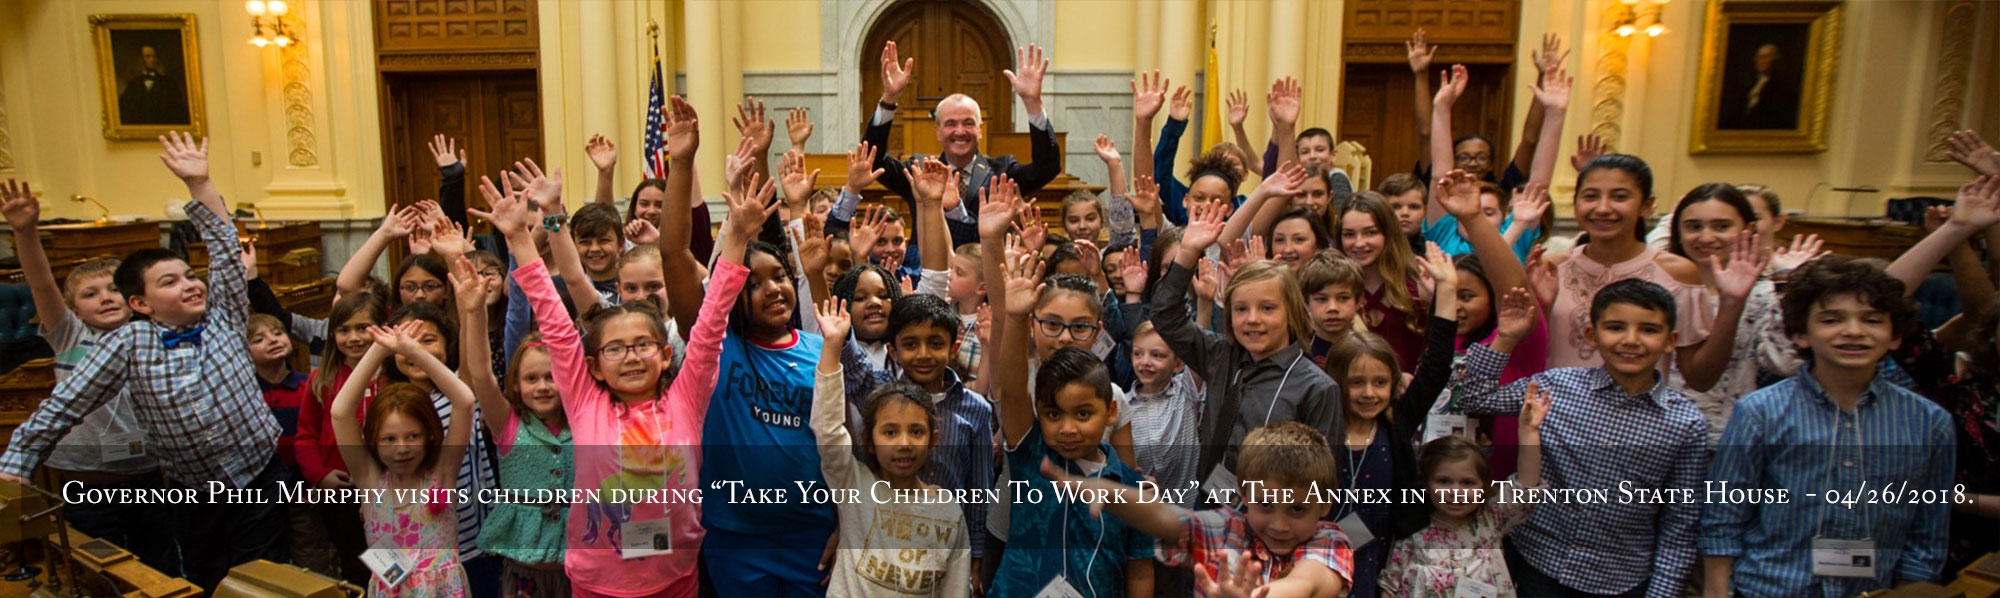 Governor Phil Murphy visits children during “Take Your Children To Work Day” at The Annex in the Trenton State House on Thursday, April 26, 2018